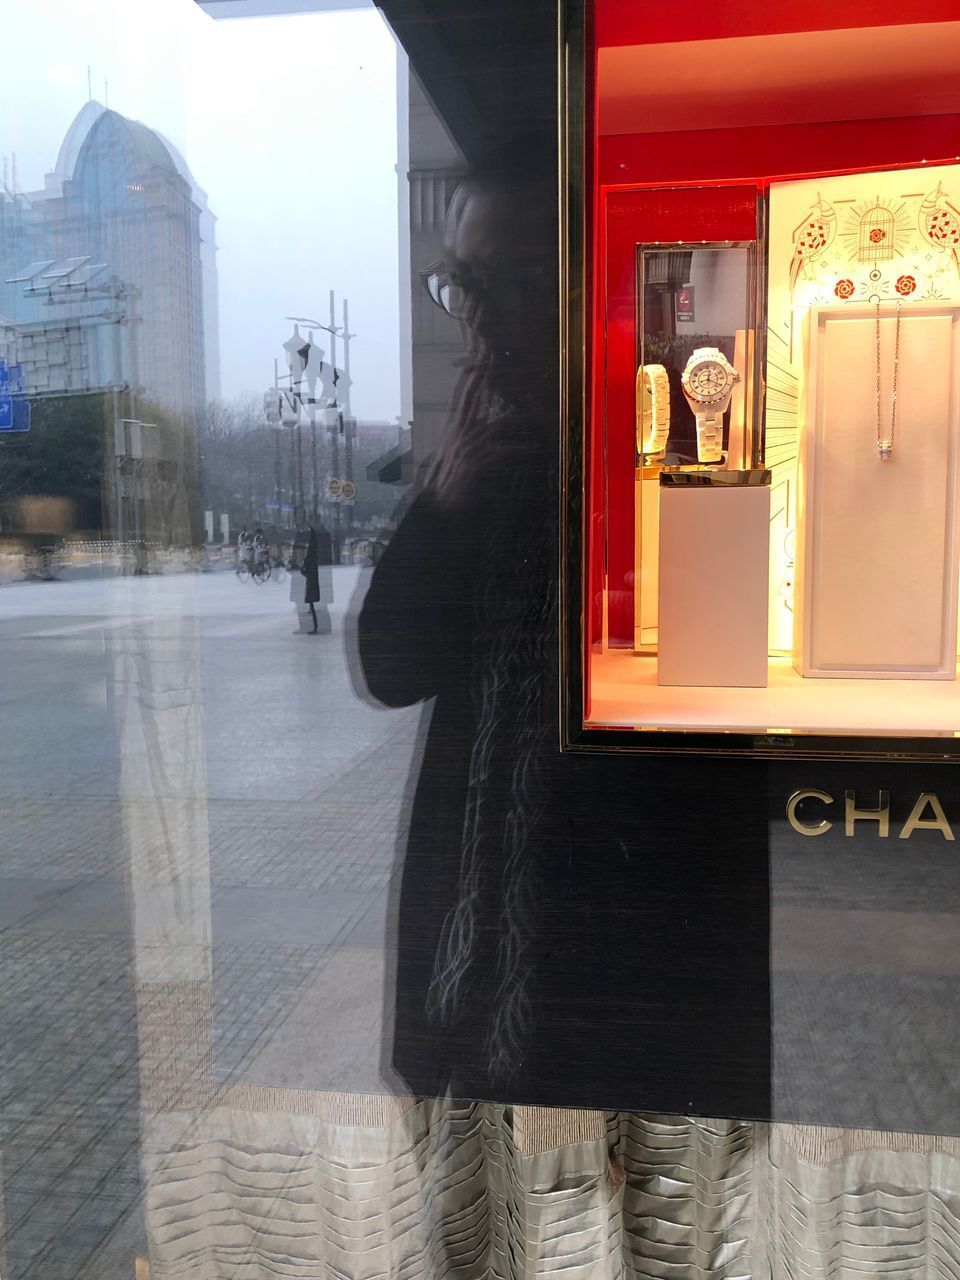 REFLECTION OF WOMAN IN GLASS WINDOW